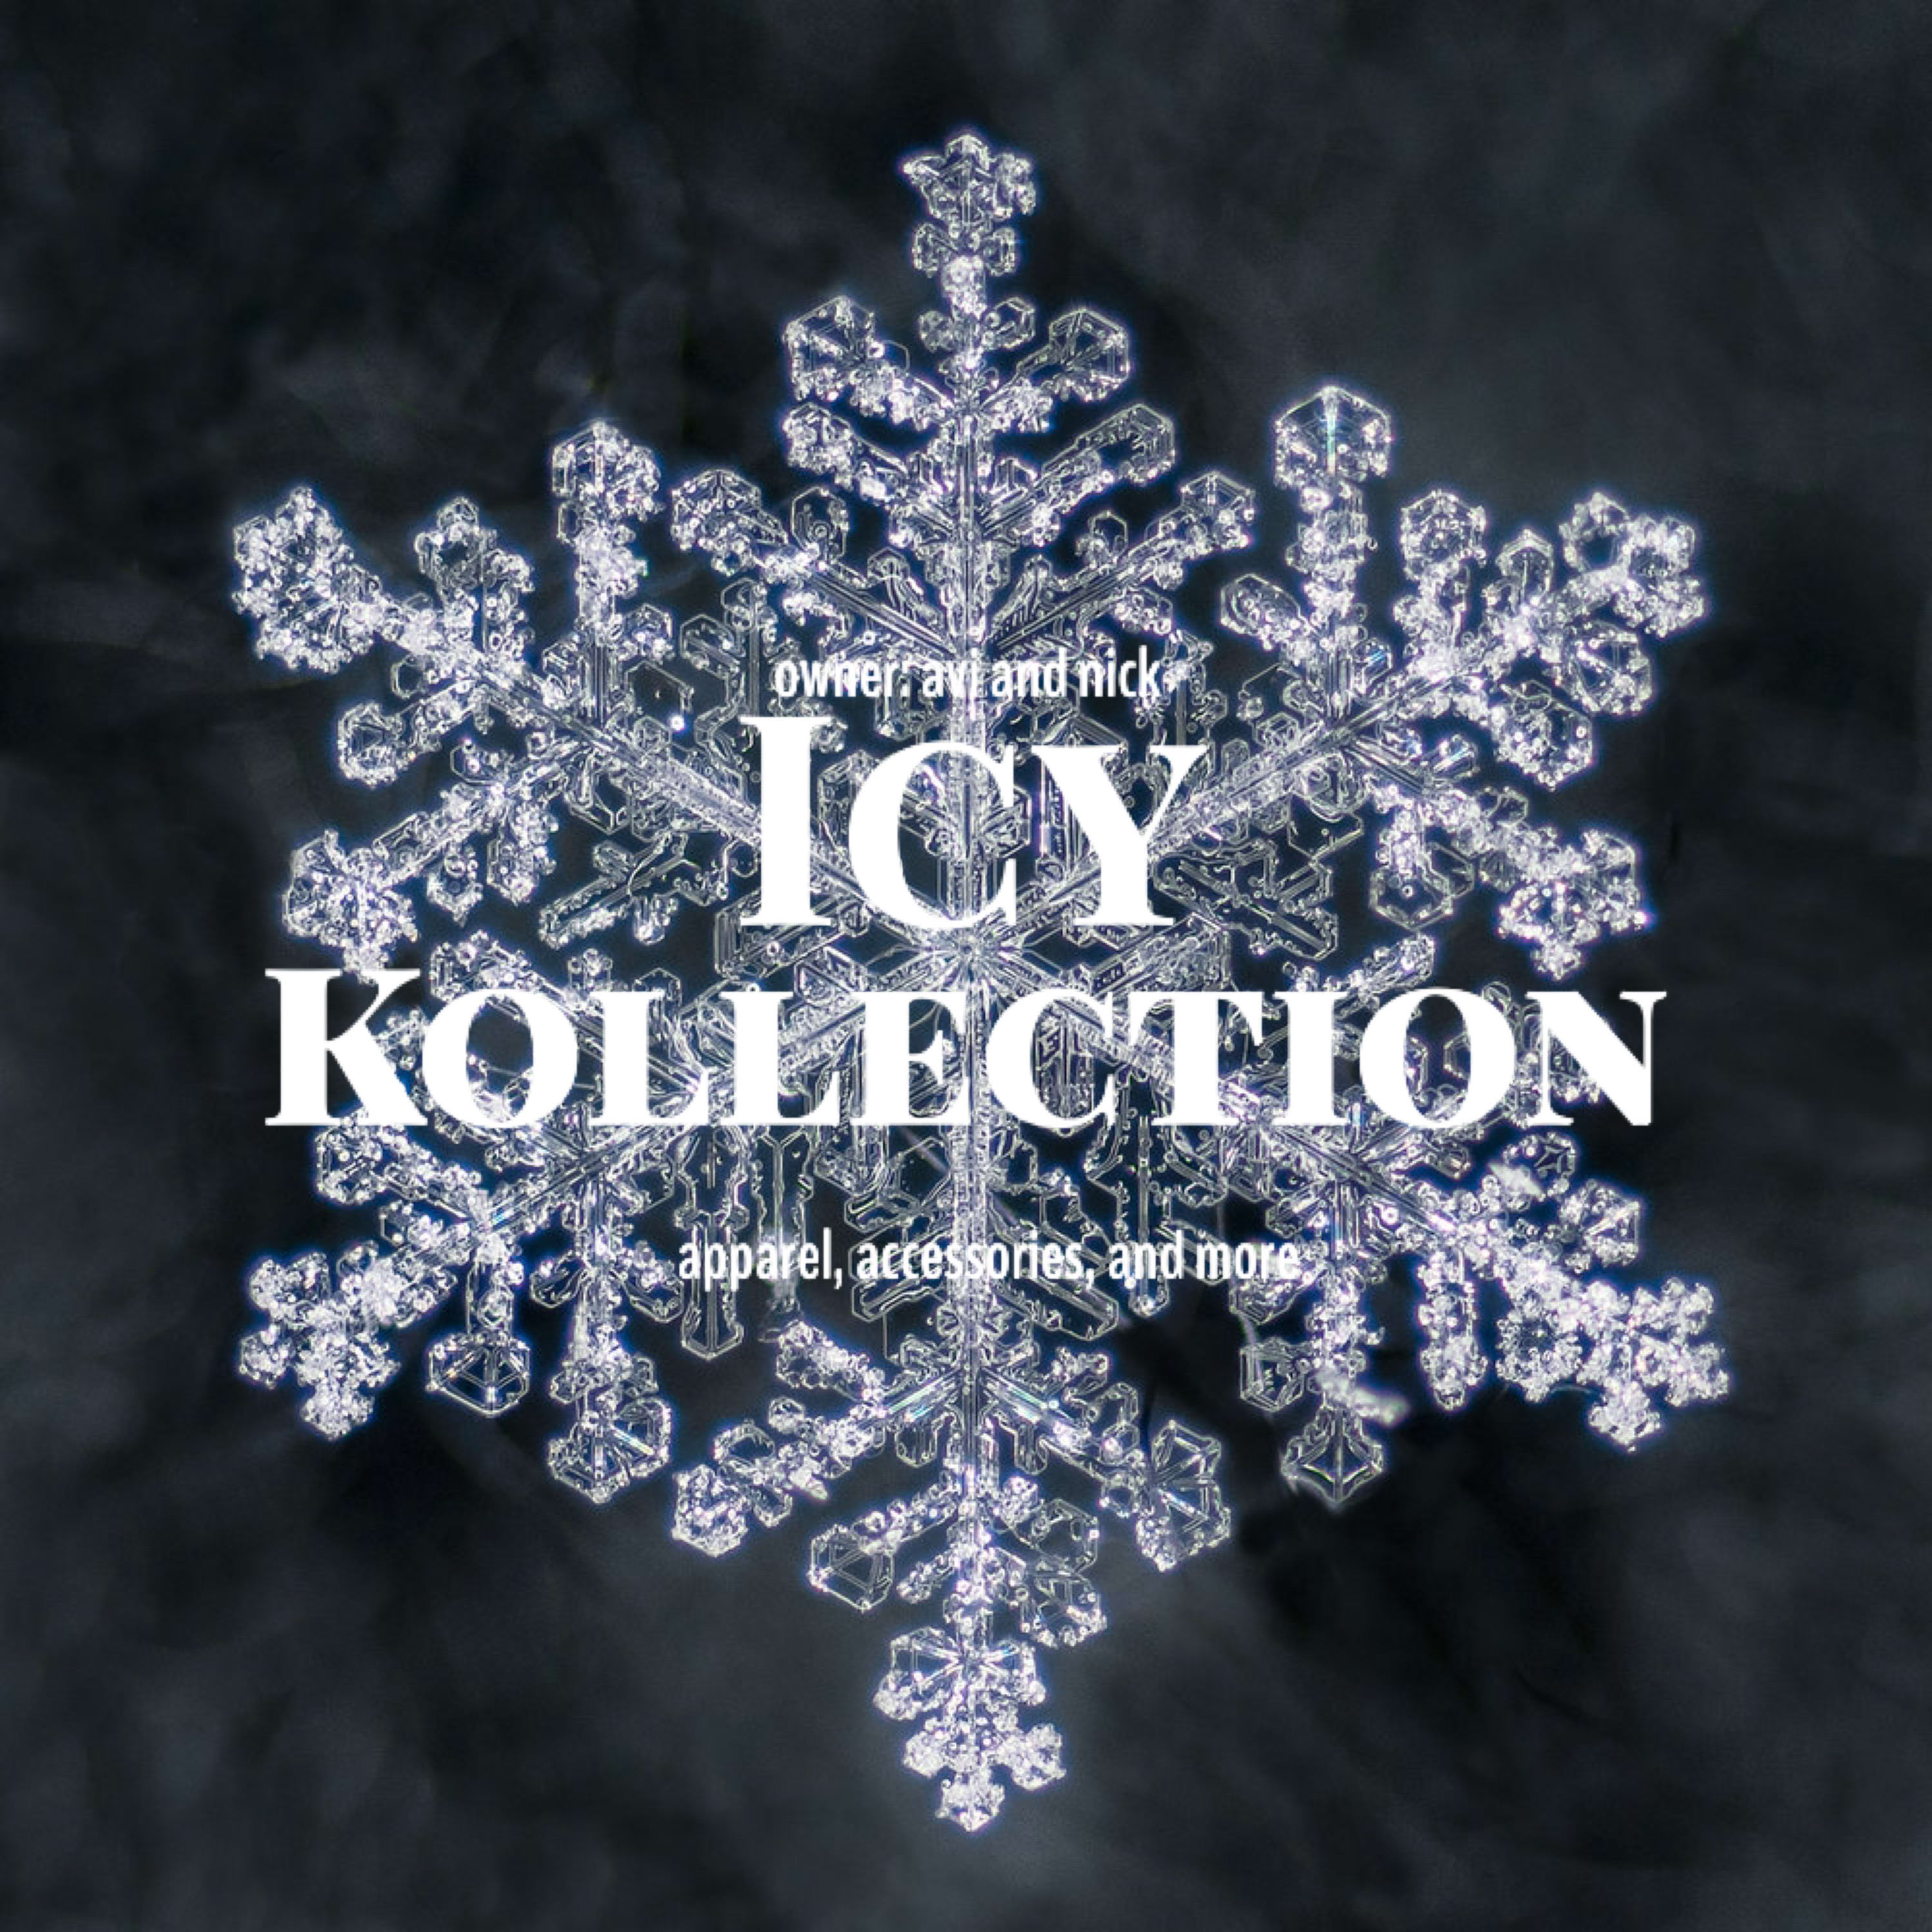 Icy Kollection